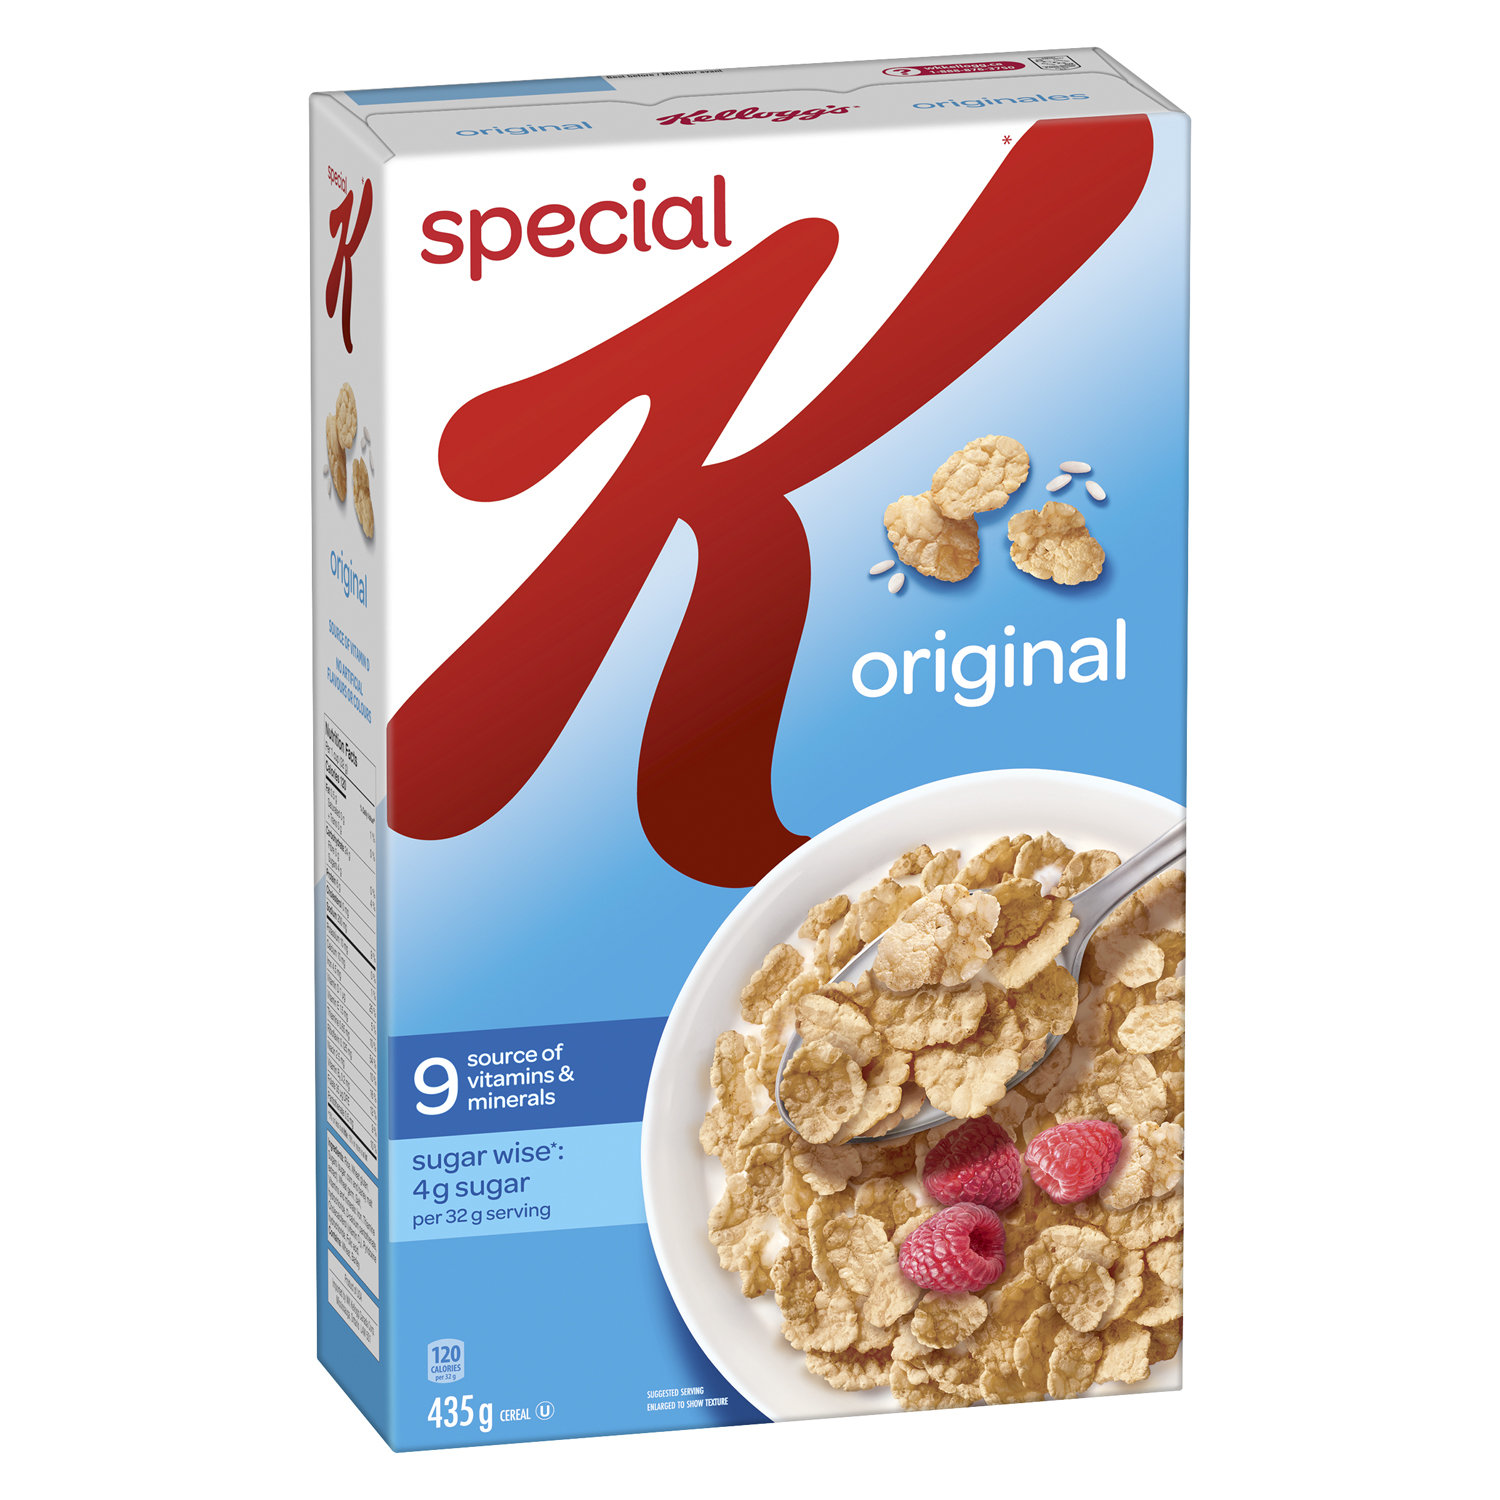 Kellogg's Special K Original Cold Breakfast Cereal, Family Size